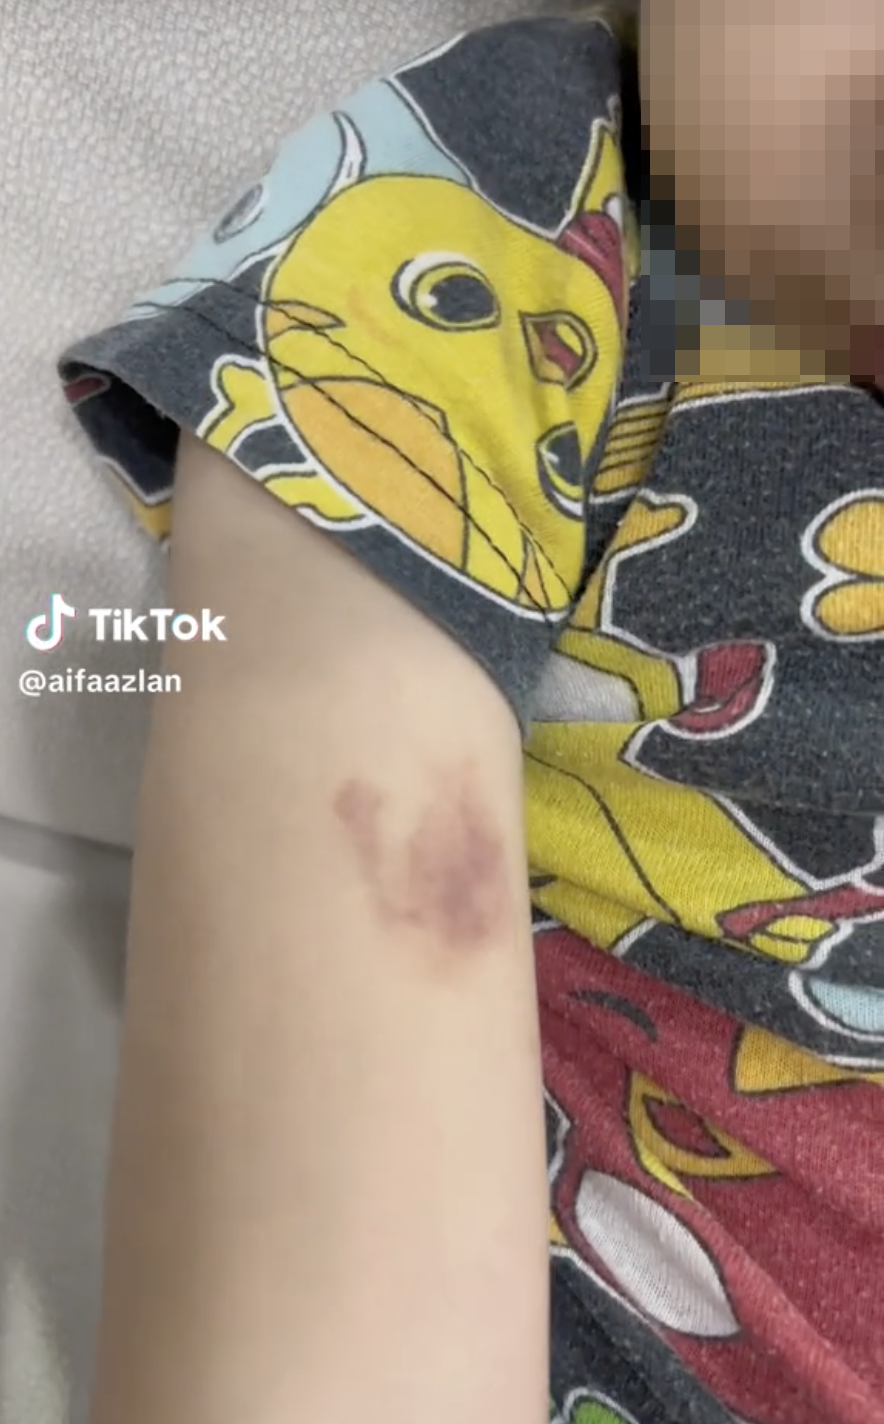 M'sian mother says bruises appeared on son's arm after staying at cameron highlands, claims it's a paranormal event | weirdkaya